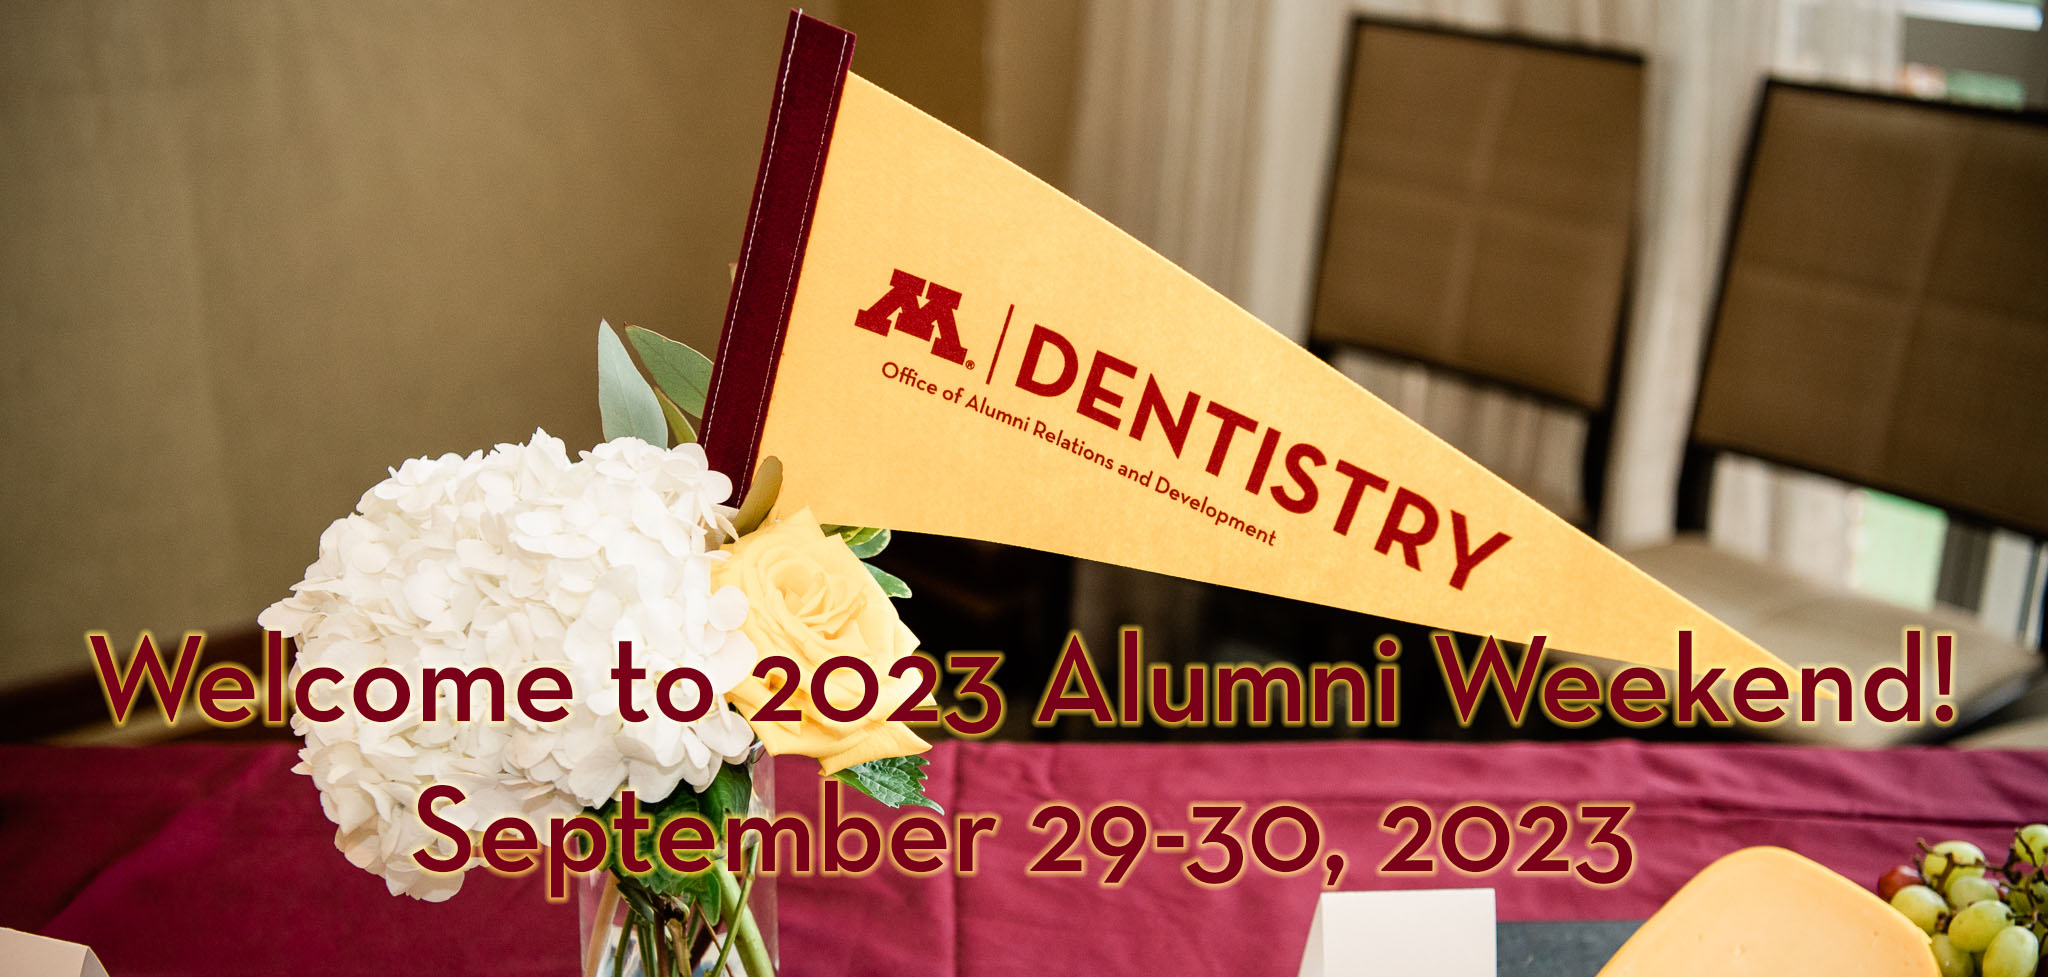 Welcome to the 2023 Alumni Weekend! September 29-30, 2023